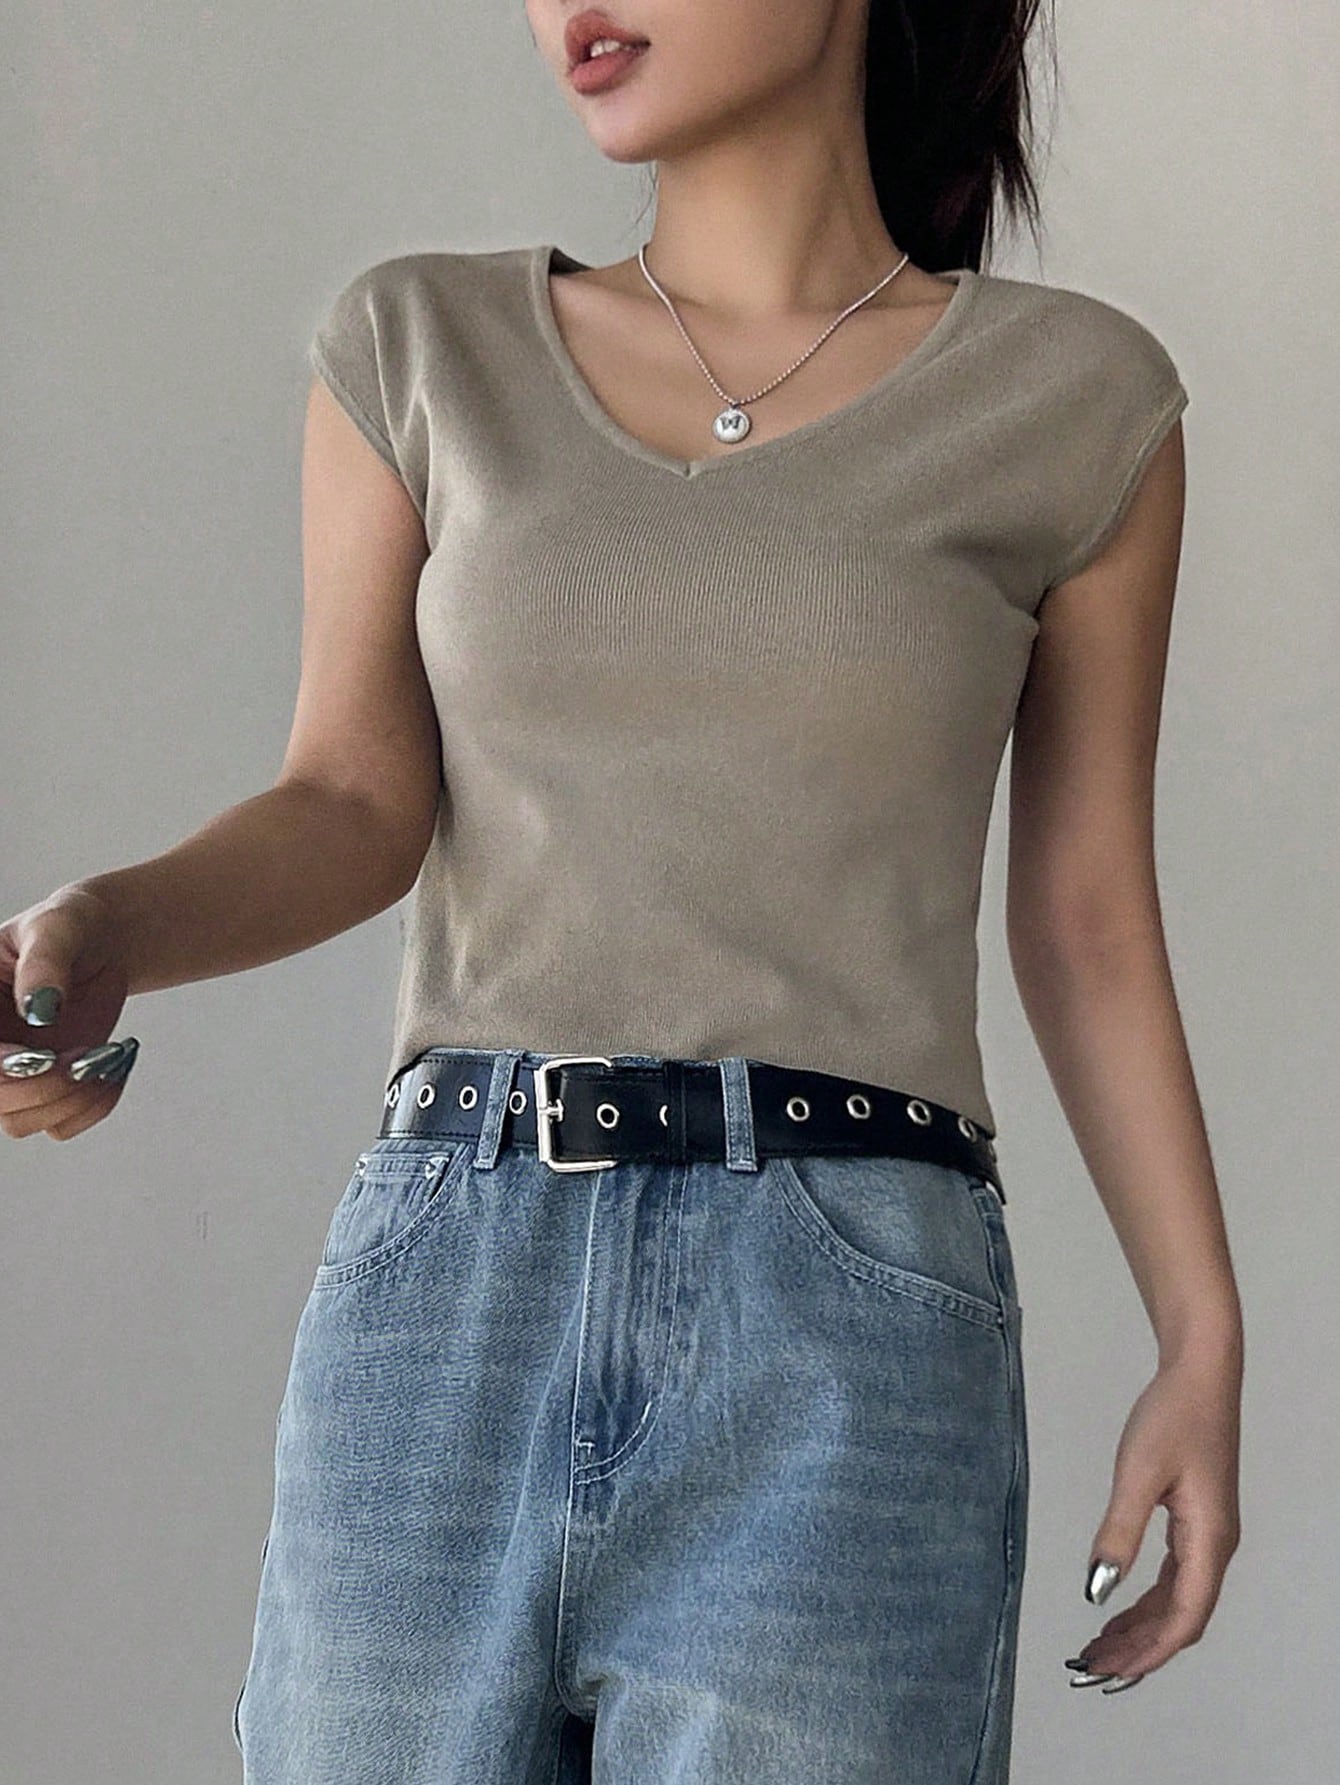 Solid Color Knitted Top For Women, V-Neck And Stretchy